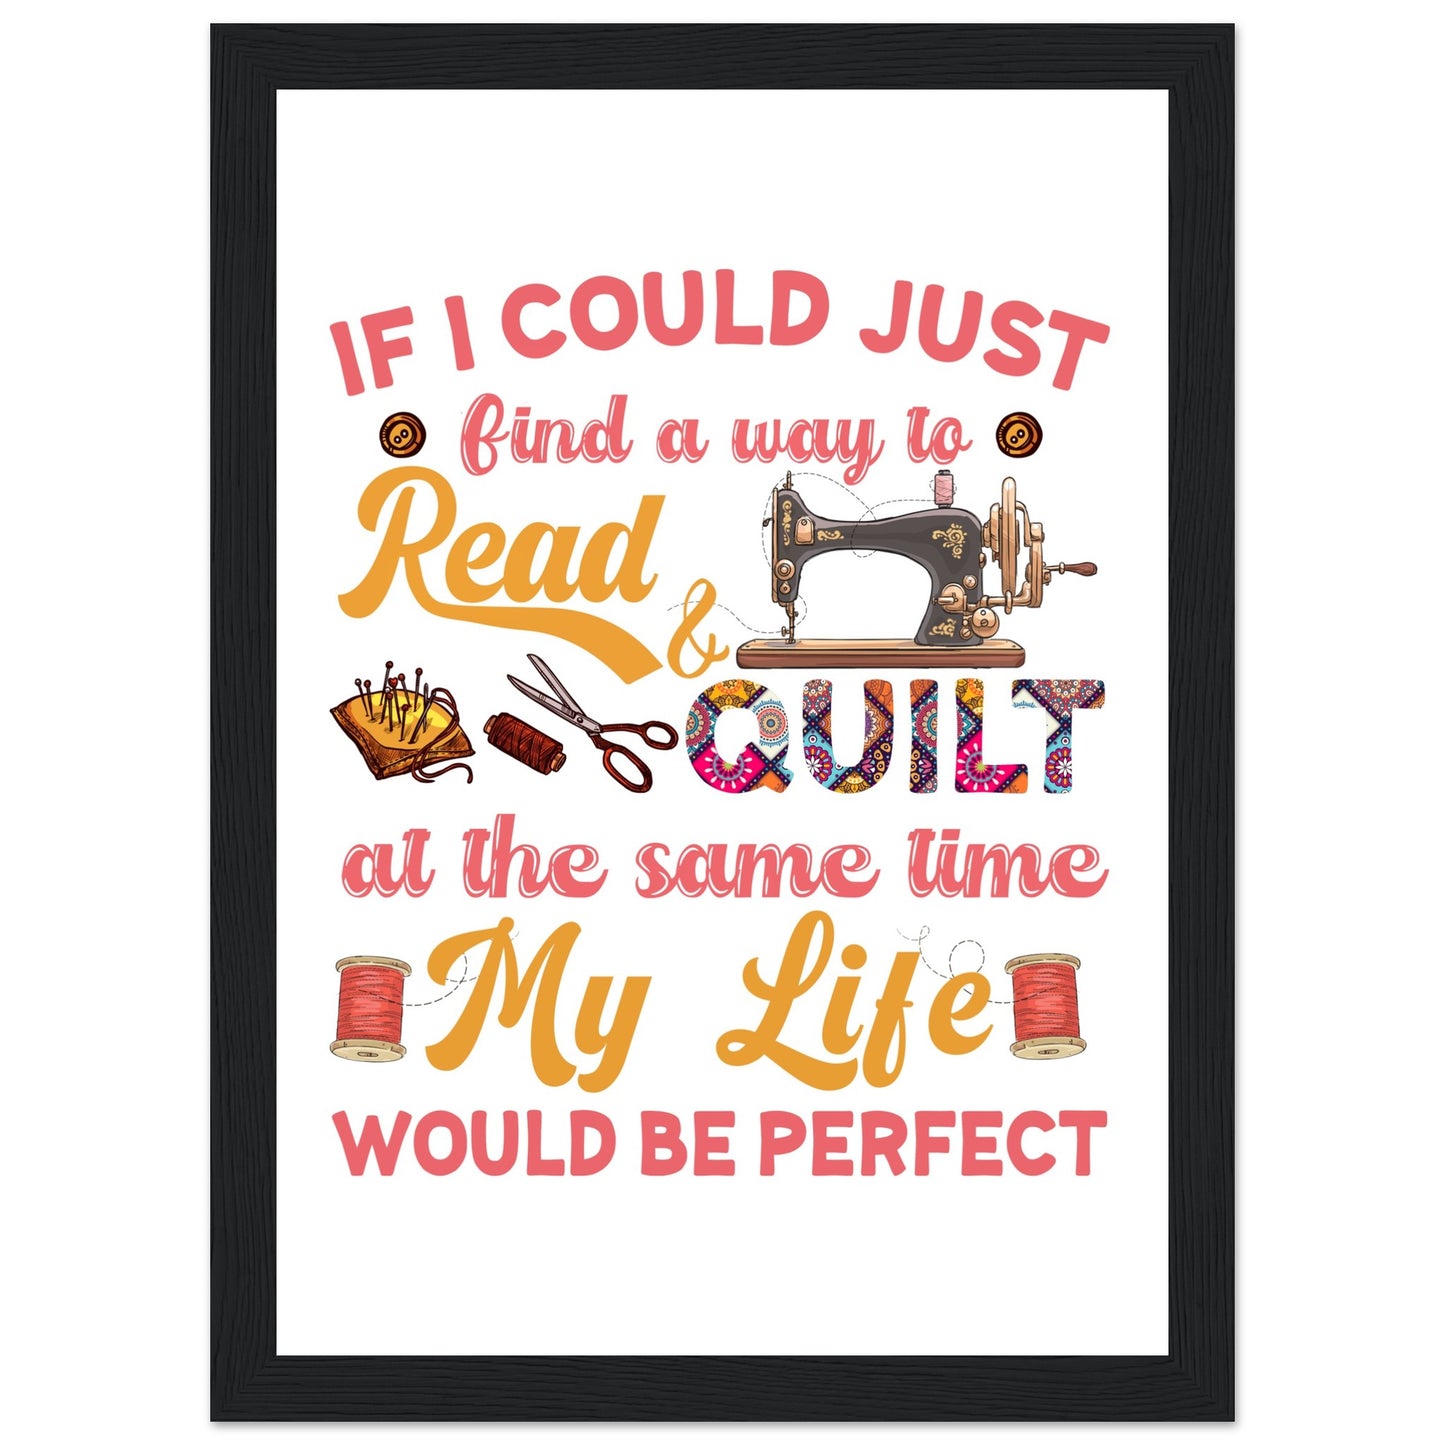 If I Could Just Find a Way to Read & Quilt at the Same Time My Life Would Be Perfect - Quilting Wall Art - Premium Matte Paper Wooden Framed Poster